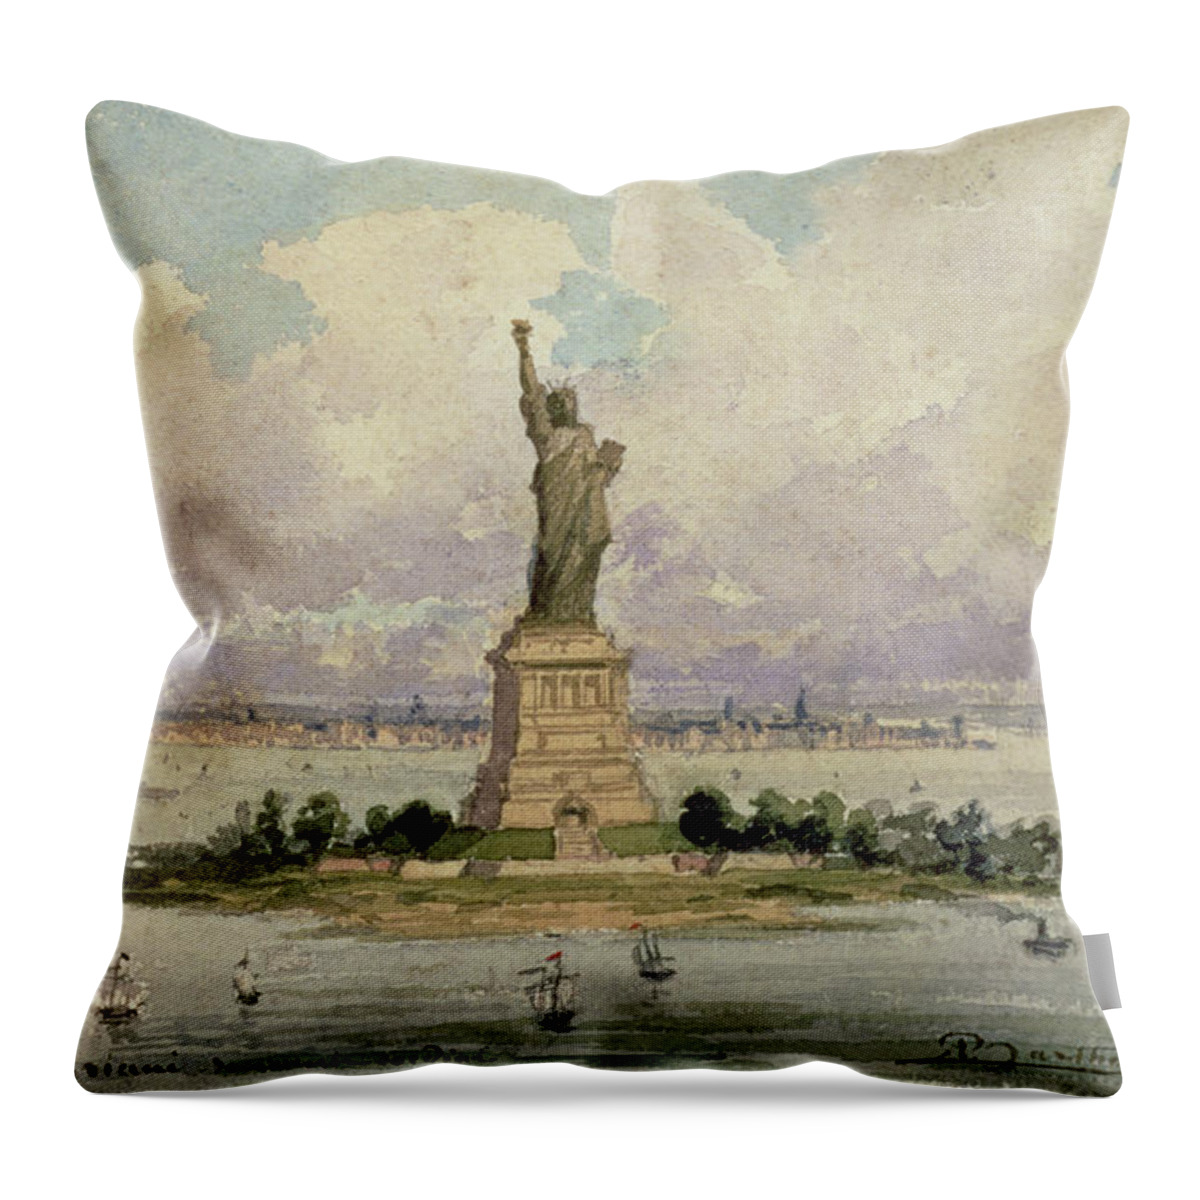 Harbour Throw Pillow featuring the painting The Statue Of Liberty by Frederic Auguste Bartholdi